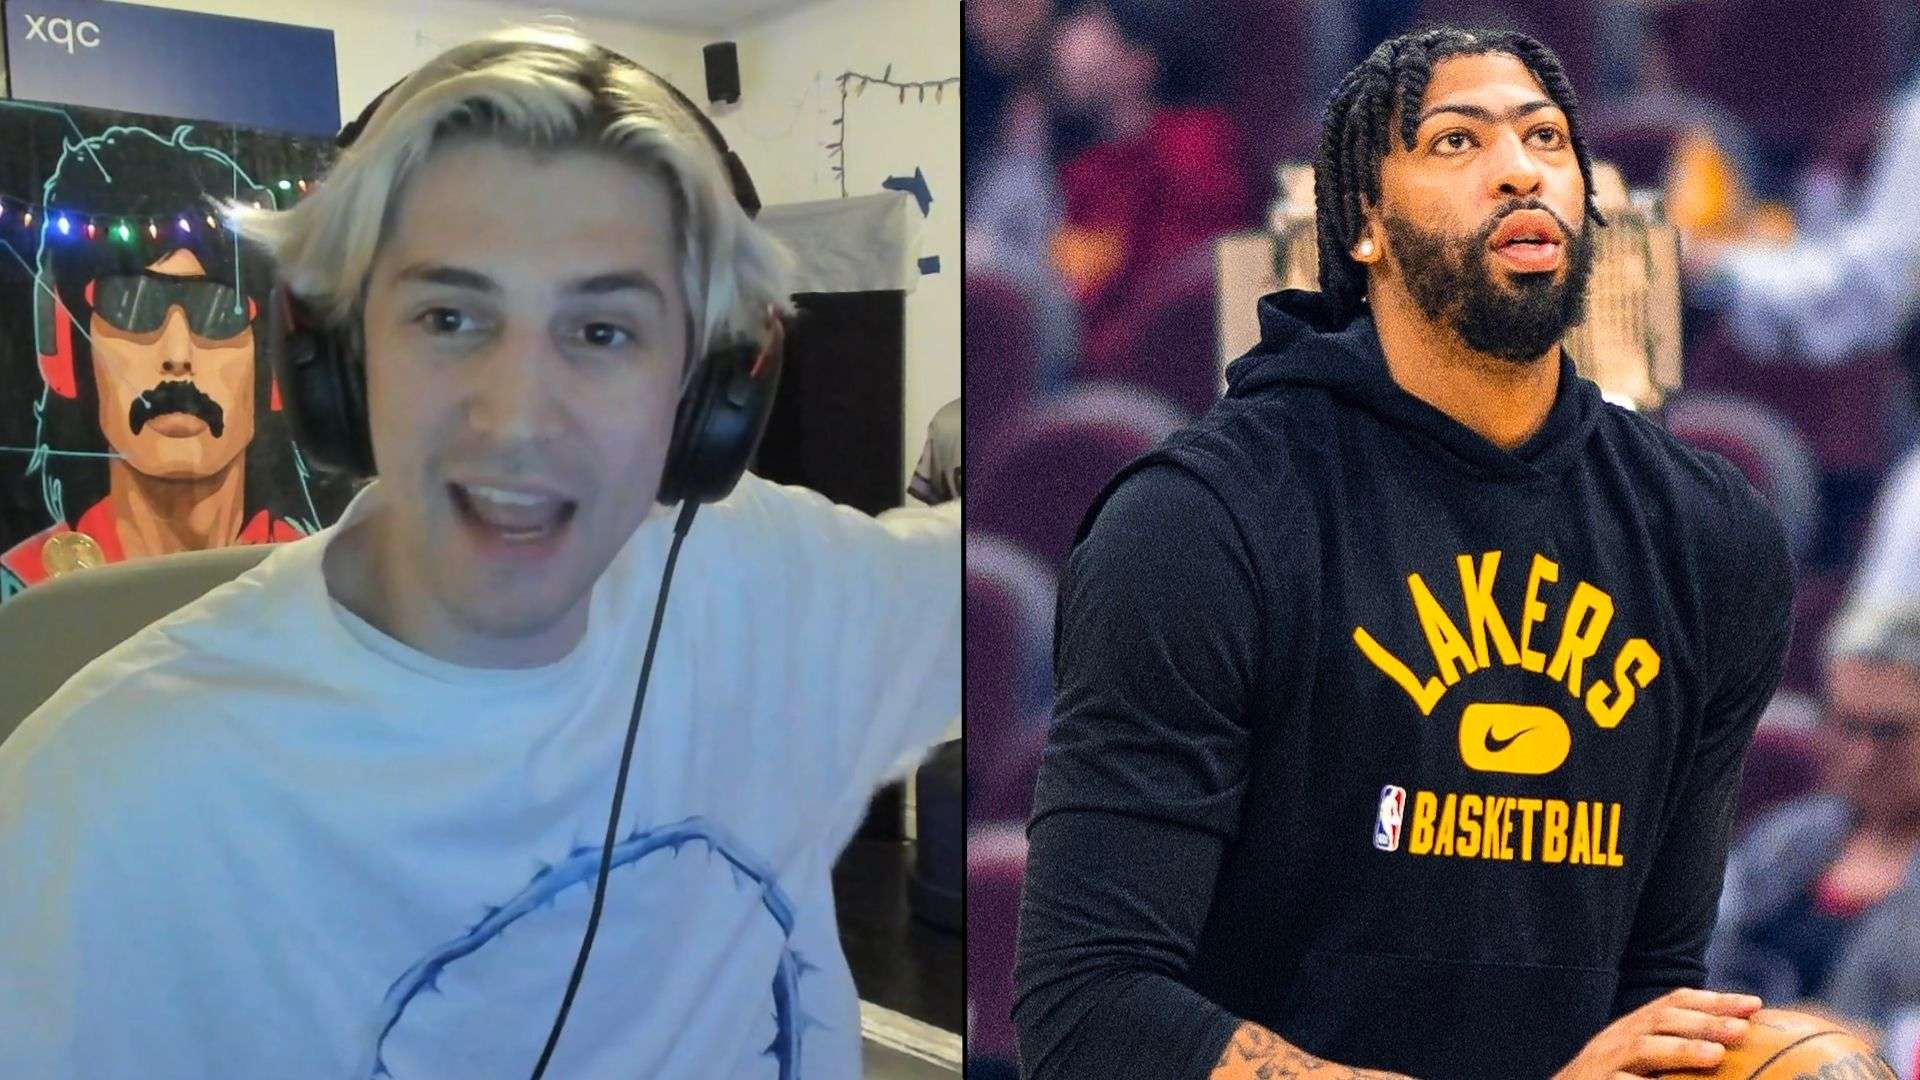 xQc in white shirt alongside Anthony Davis in black and yellow hoodie shooting basketball